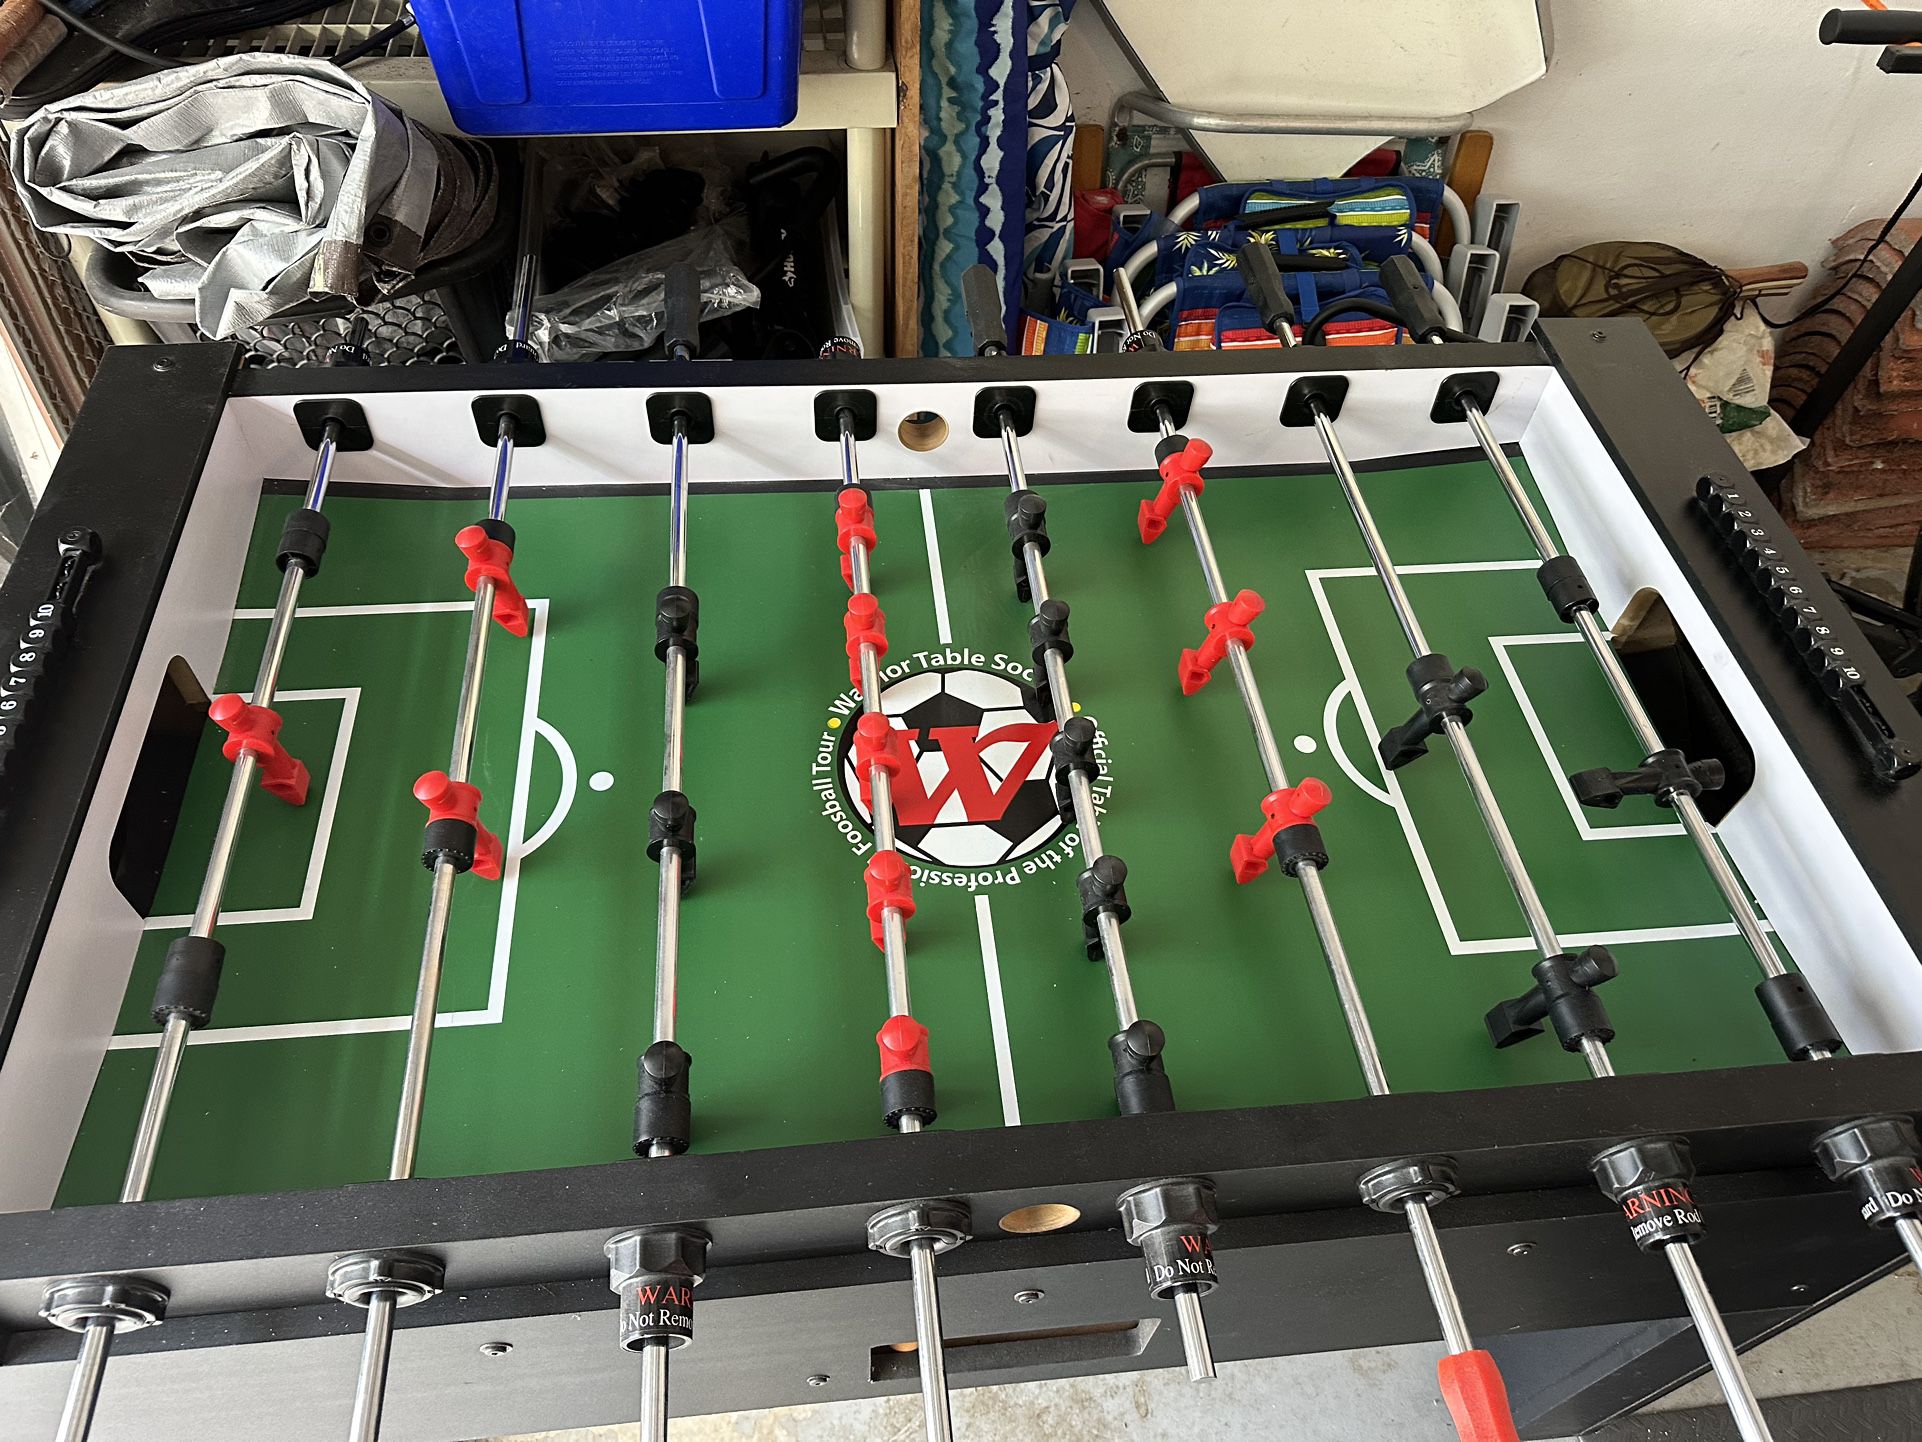 Professional Warrior Foosball Table For Less Than 1/2 The Price